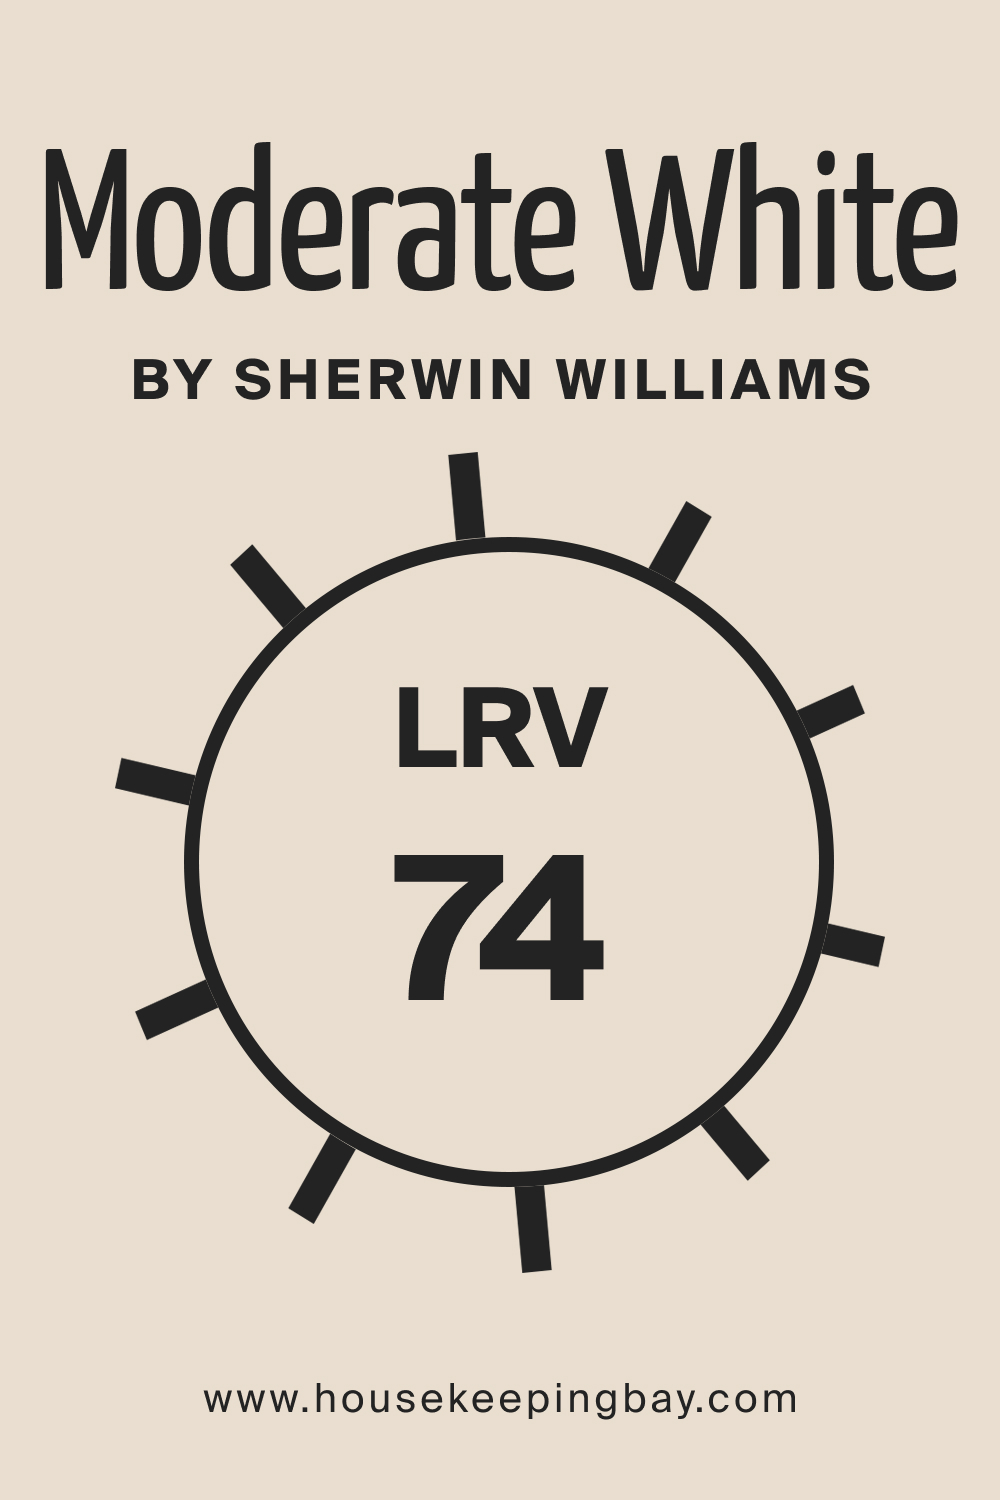 SW Moderate White by Sherwin Williams. LRV – 74